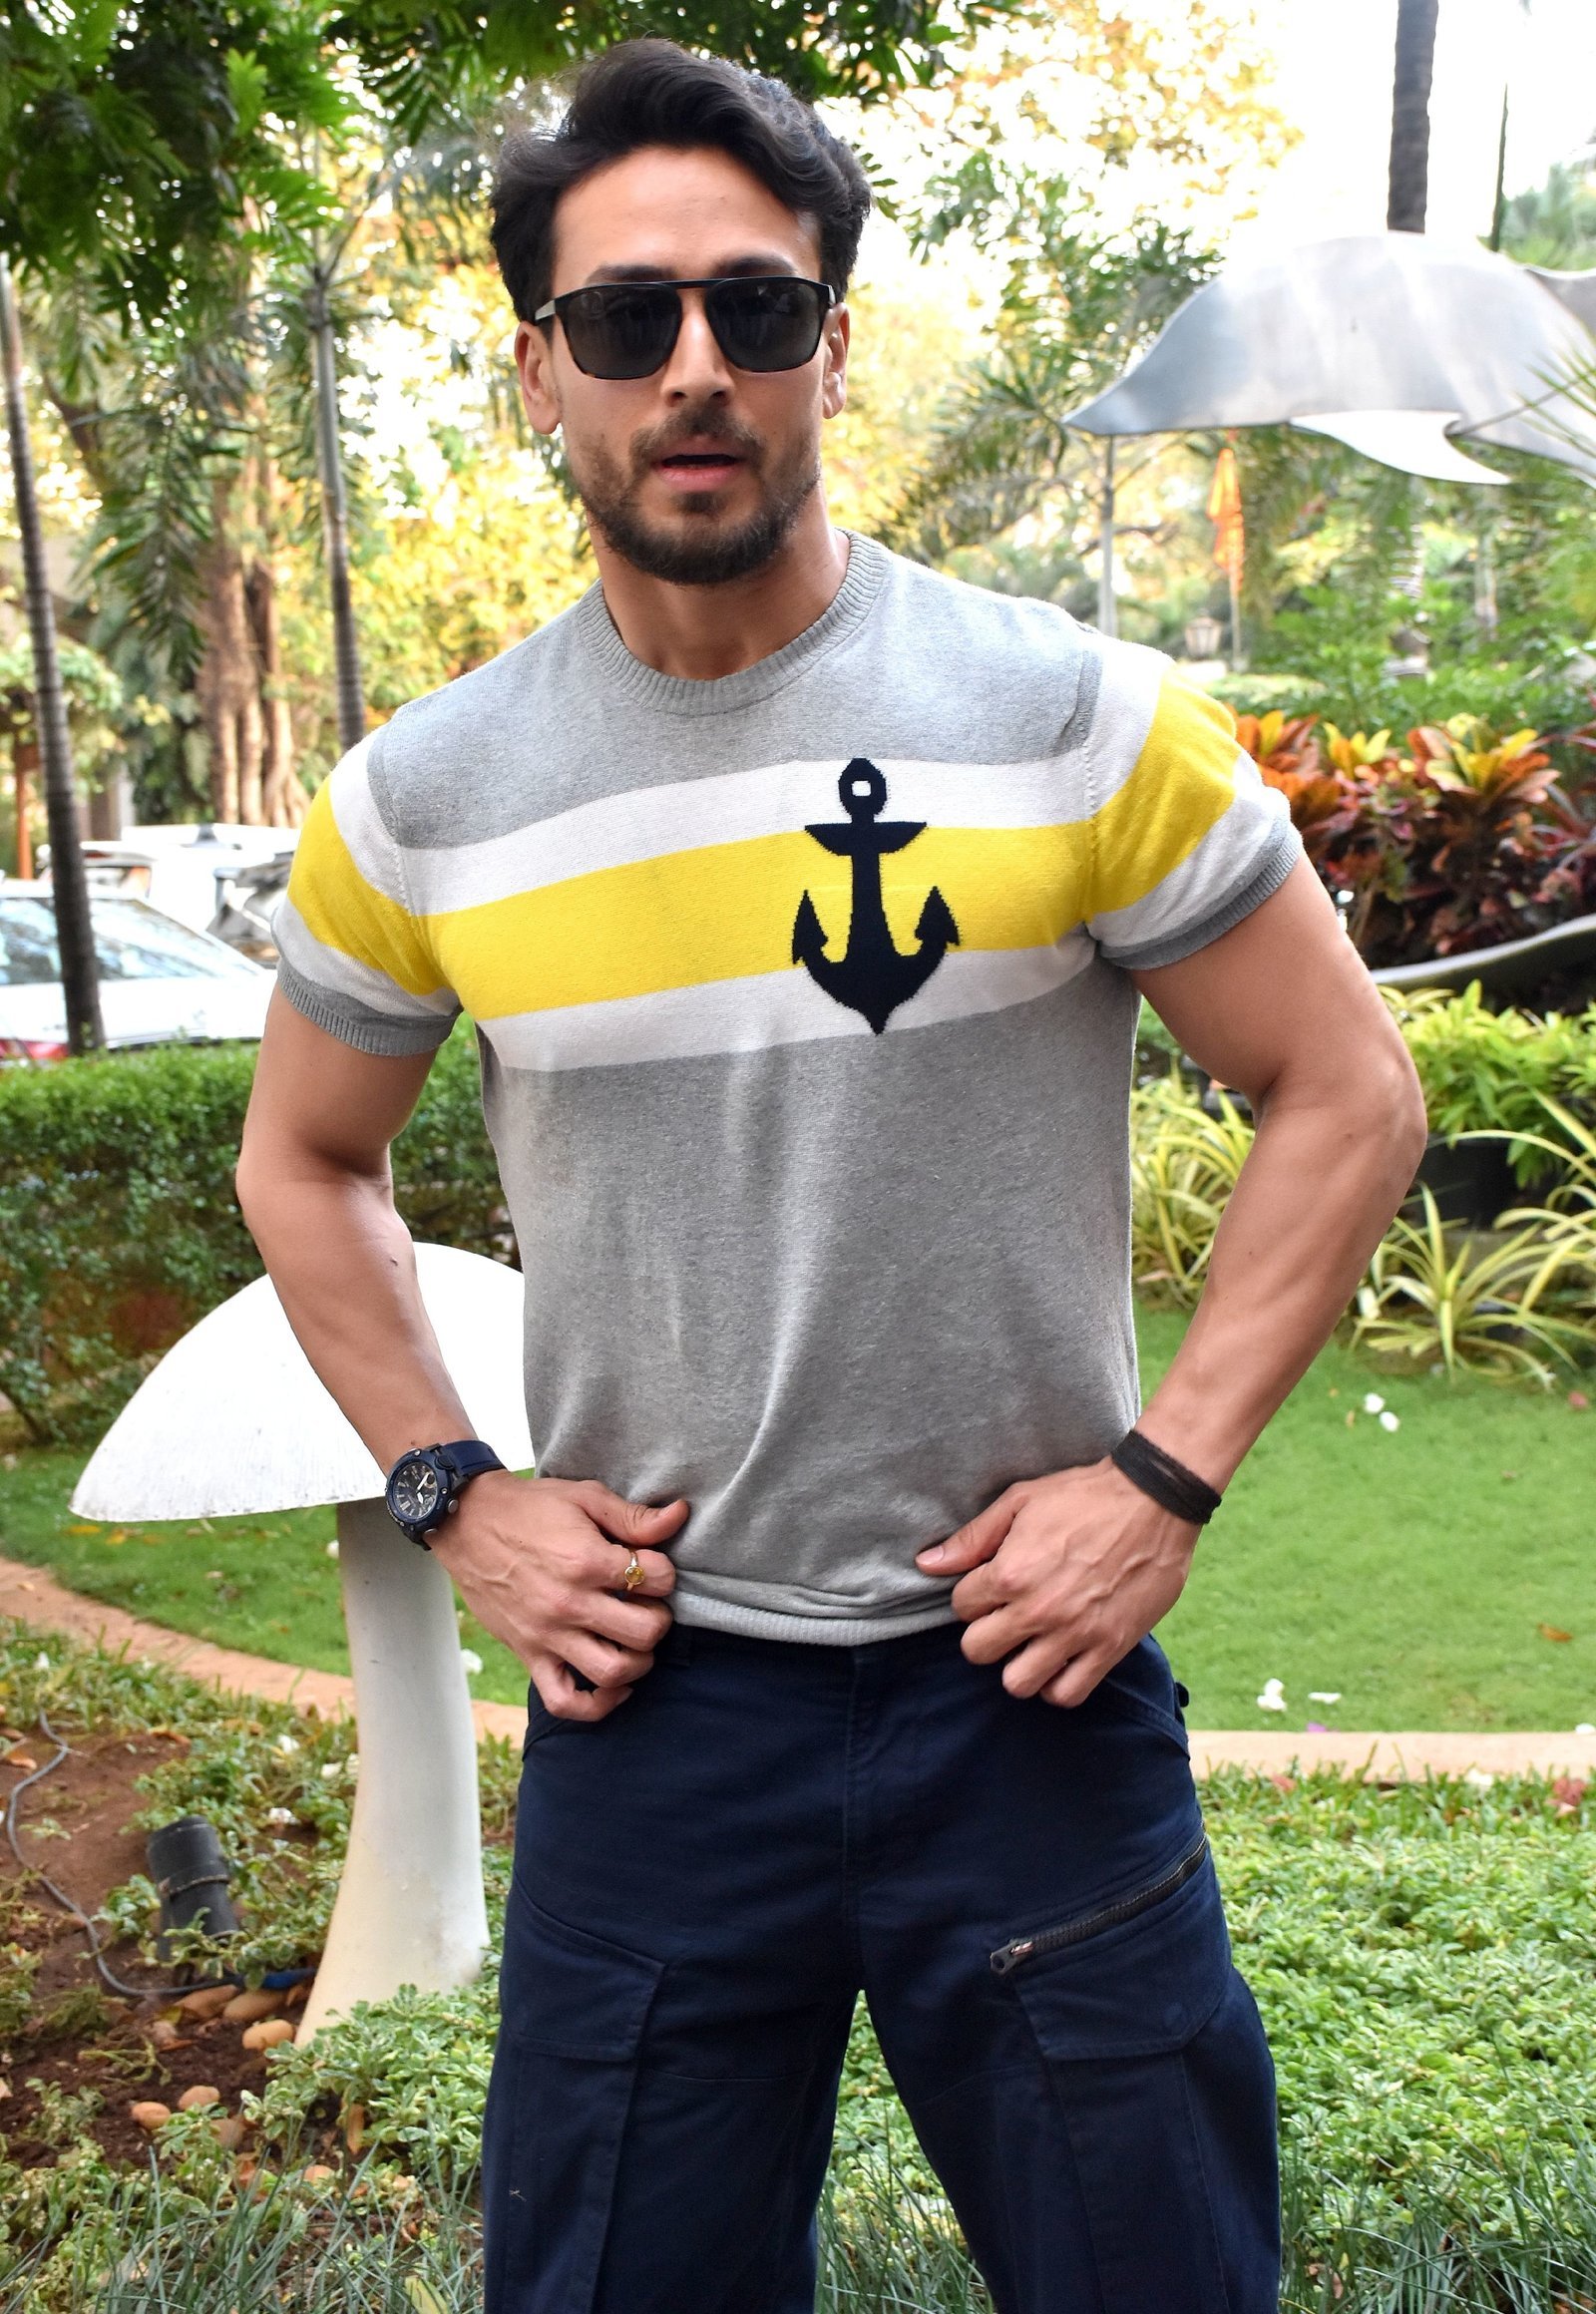 Tiger Shroff - Photos: Promotion Of Film Baaghi 3 At Sun N Sand | Picture 1723402